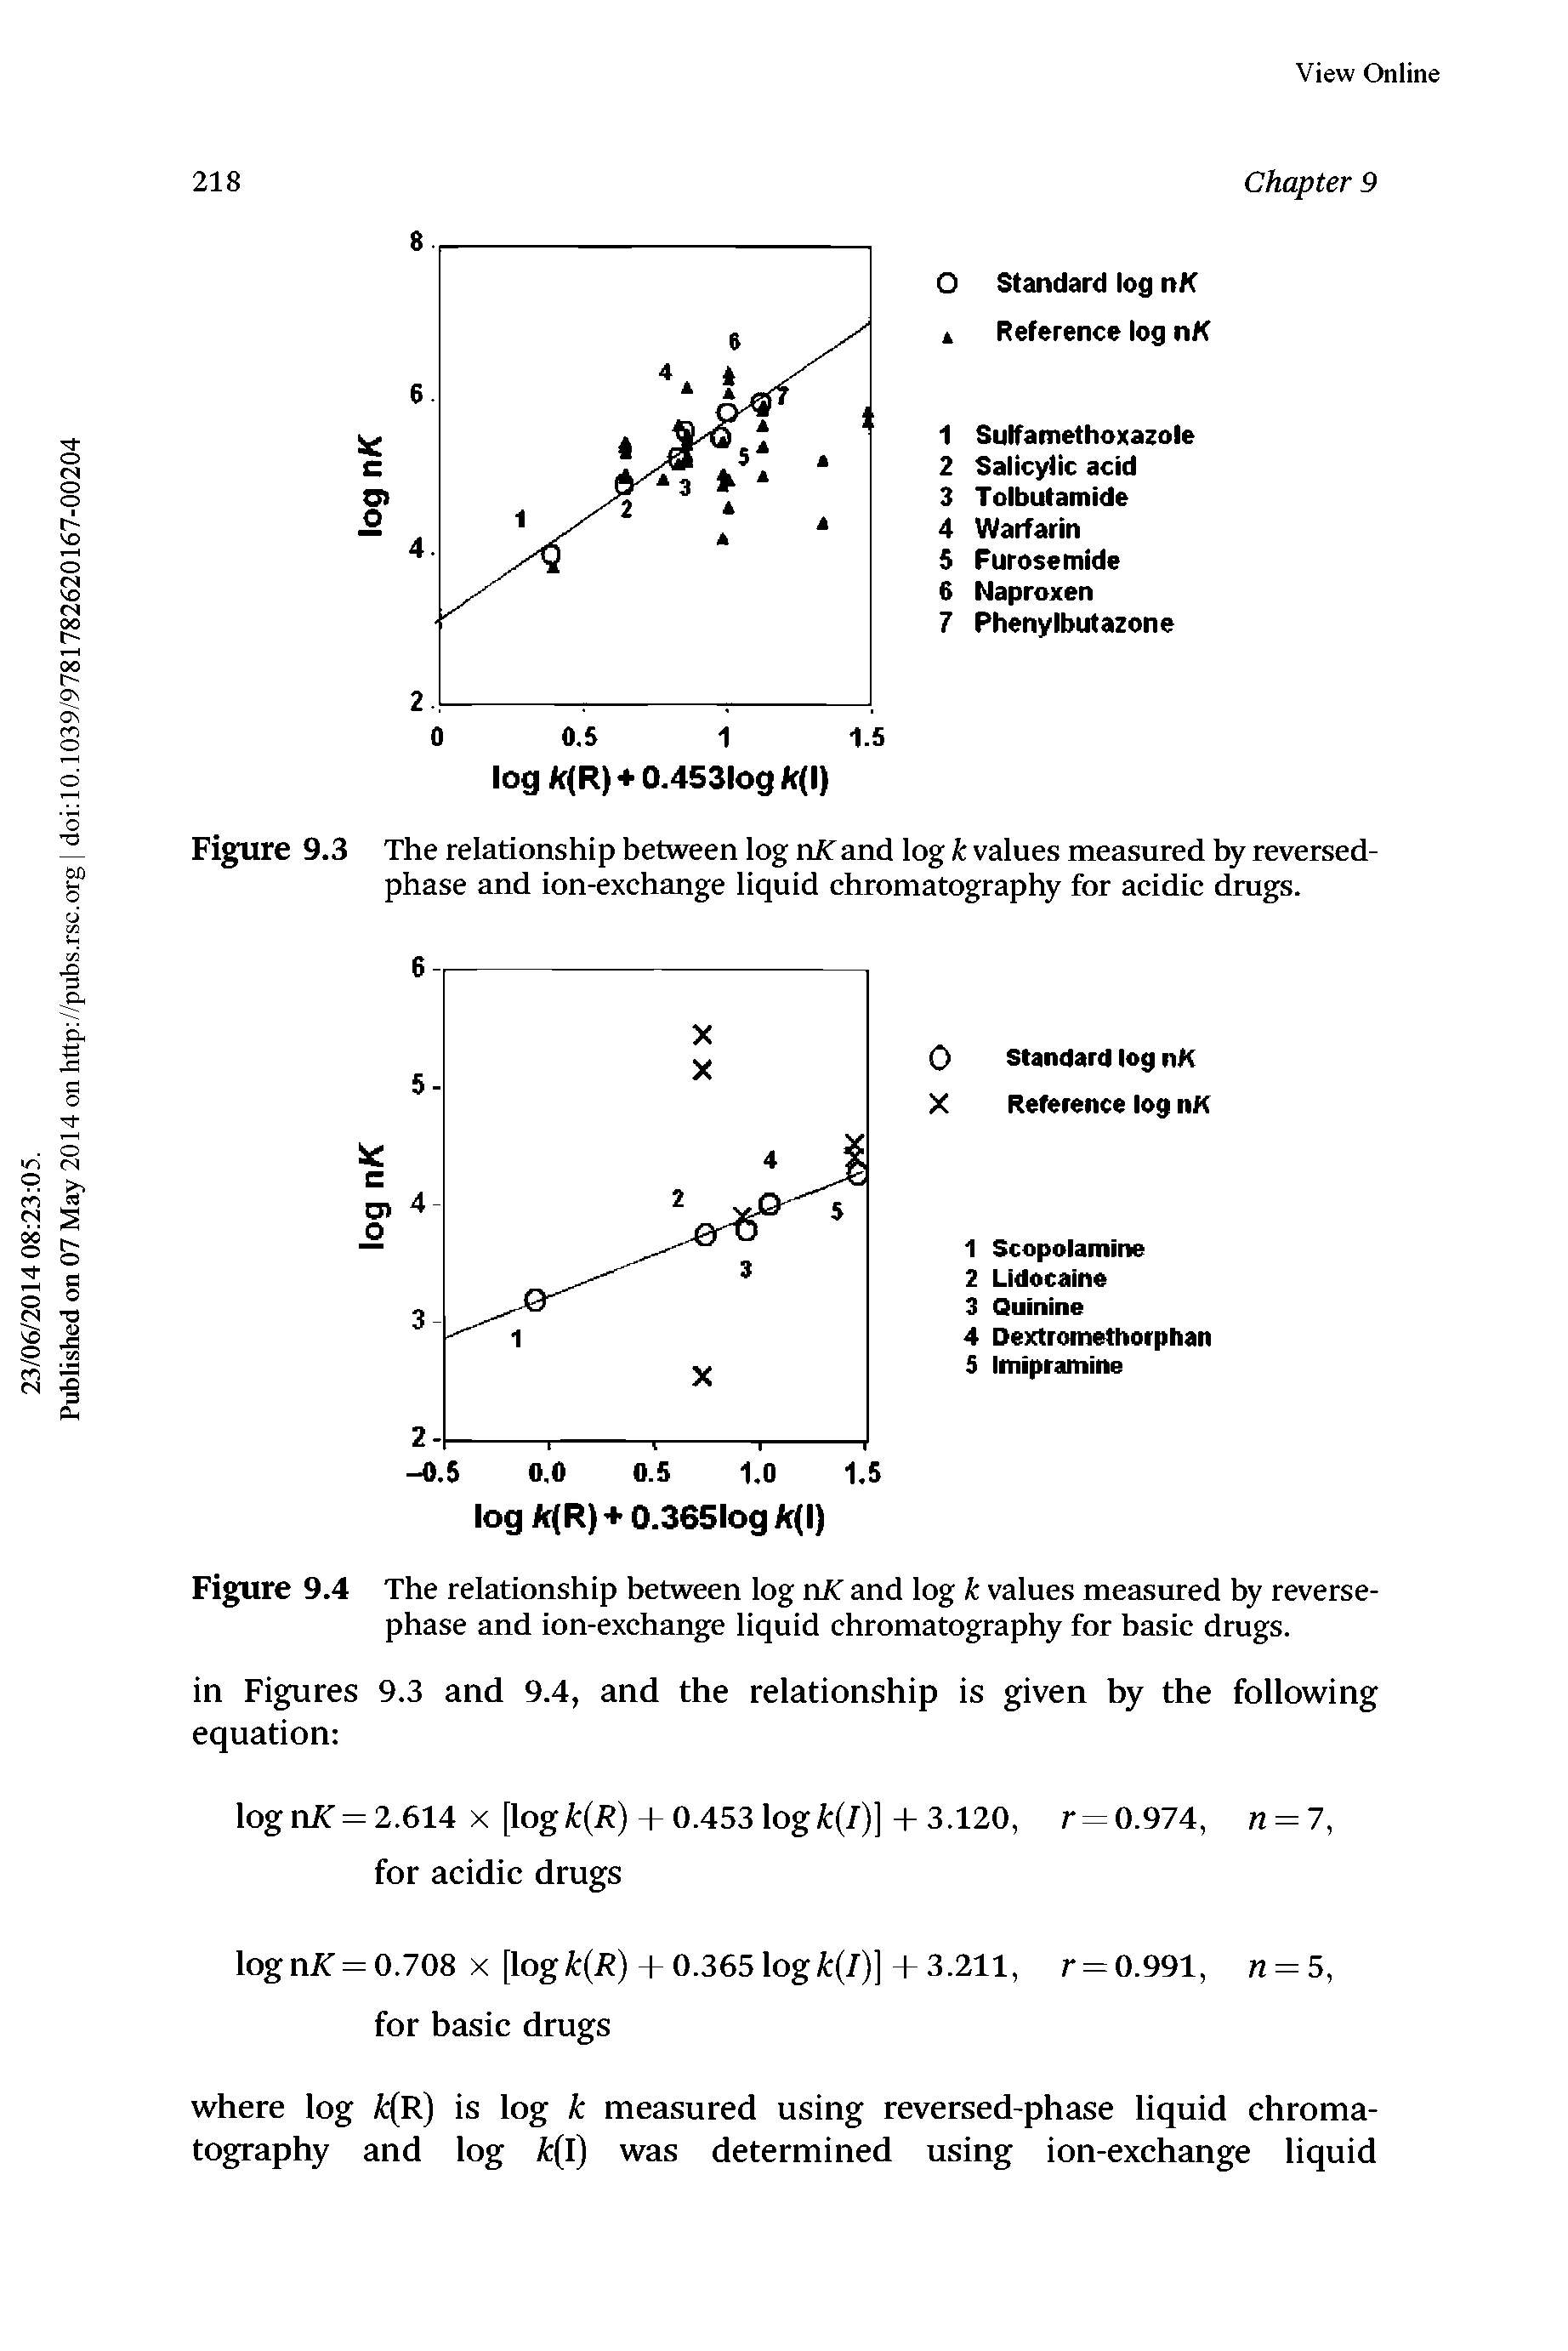 Figure 9.3 The relationship between log nK and log k values measured by reversed-phase and ion-exchange liquid chromatography for acidic drugs.